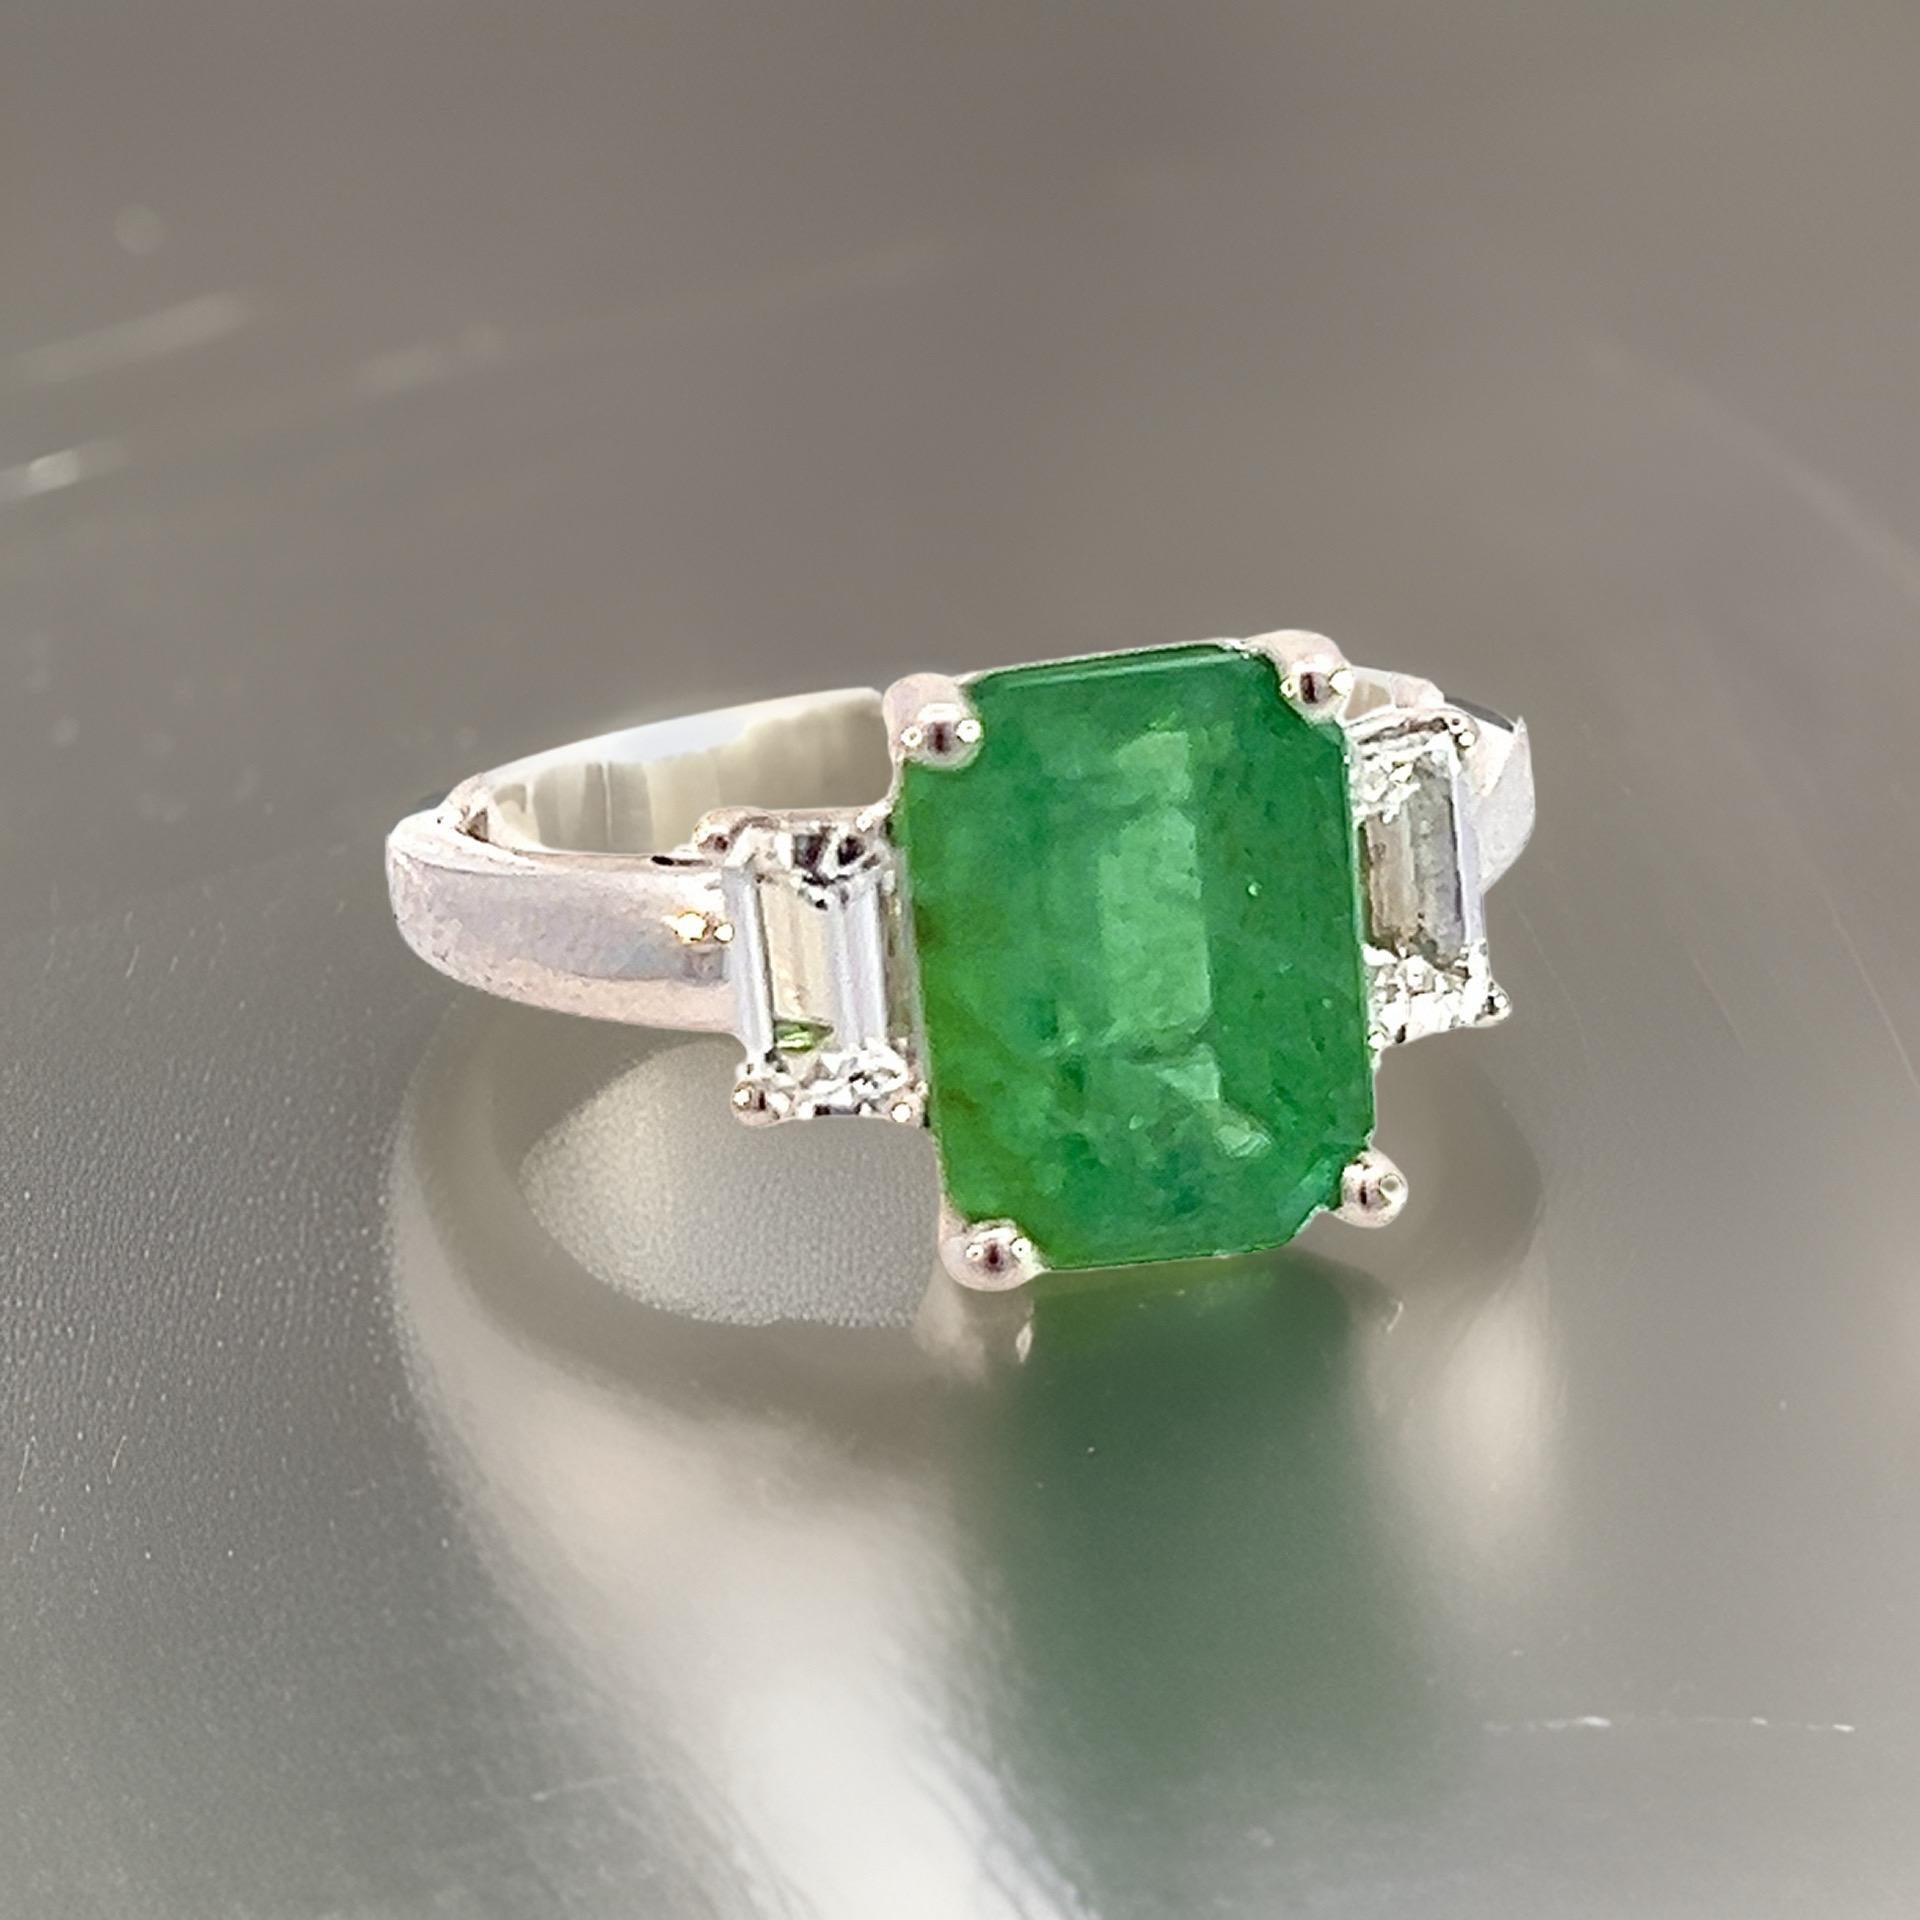 Natural Quality Emerald White Sapphire Ring Size 6.25 14k White Gold 3.49 TCW Certified $4,970 310641

This is a Unique Custom Made Glamorous Piece of Jewelry!

Nothing says, “I Love you” more than Diamonds and Pearls!

This Emerald Sapphire ring